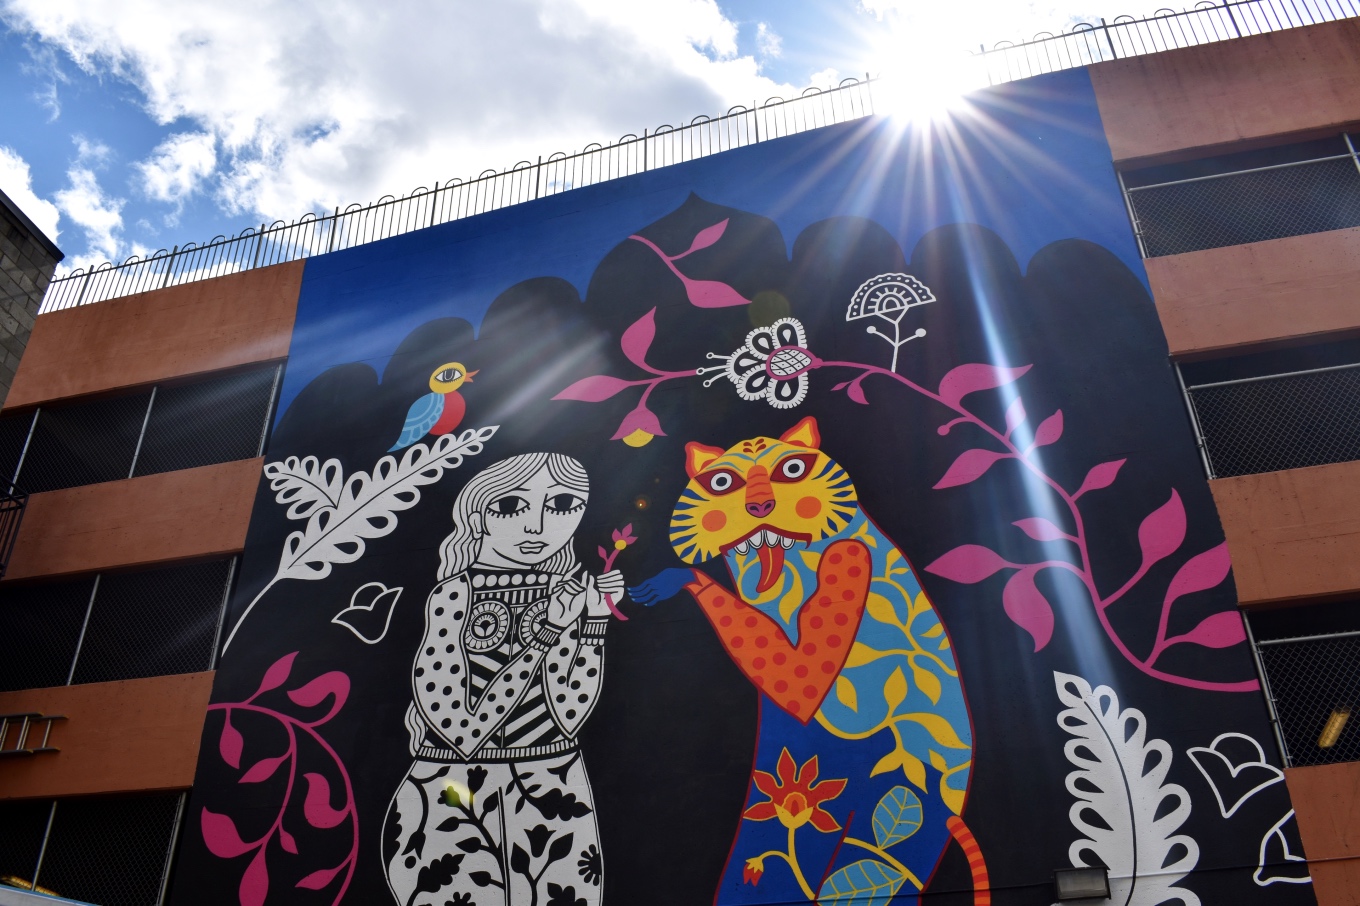 Nelson Mural Festival announces first wave of muralists, performers